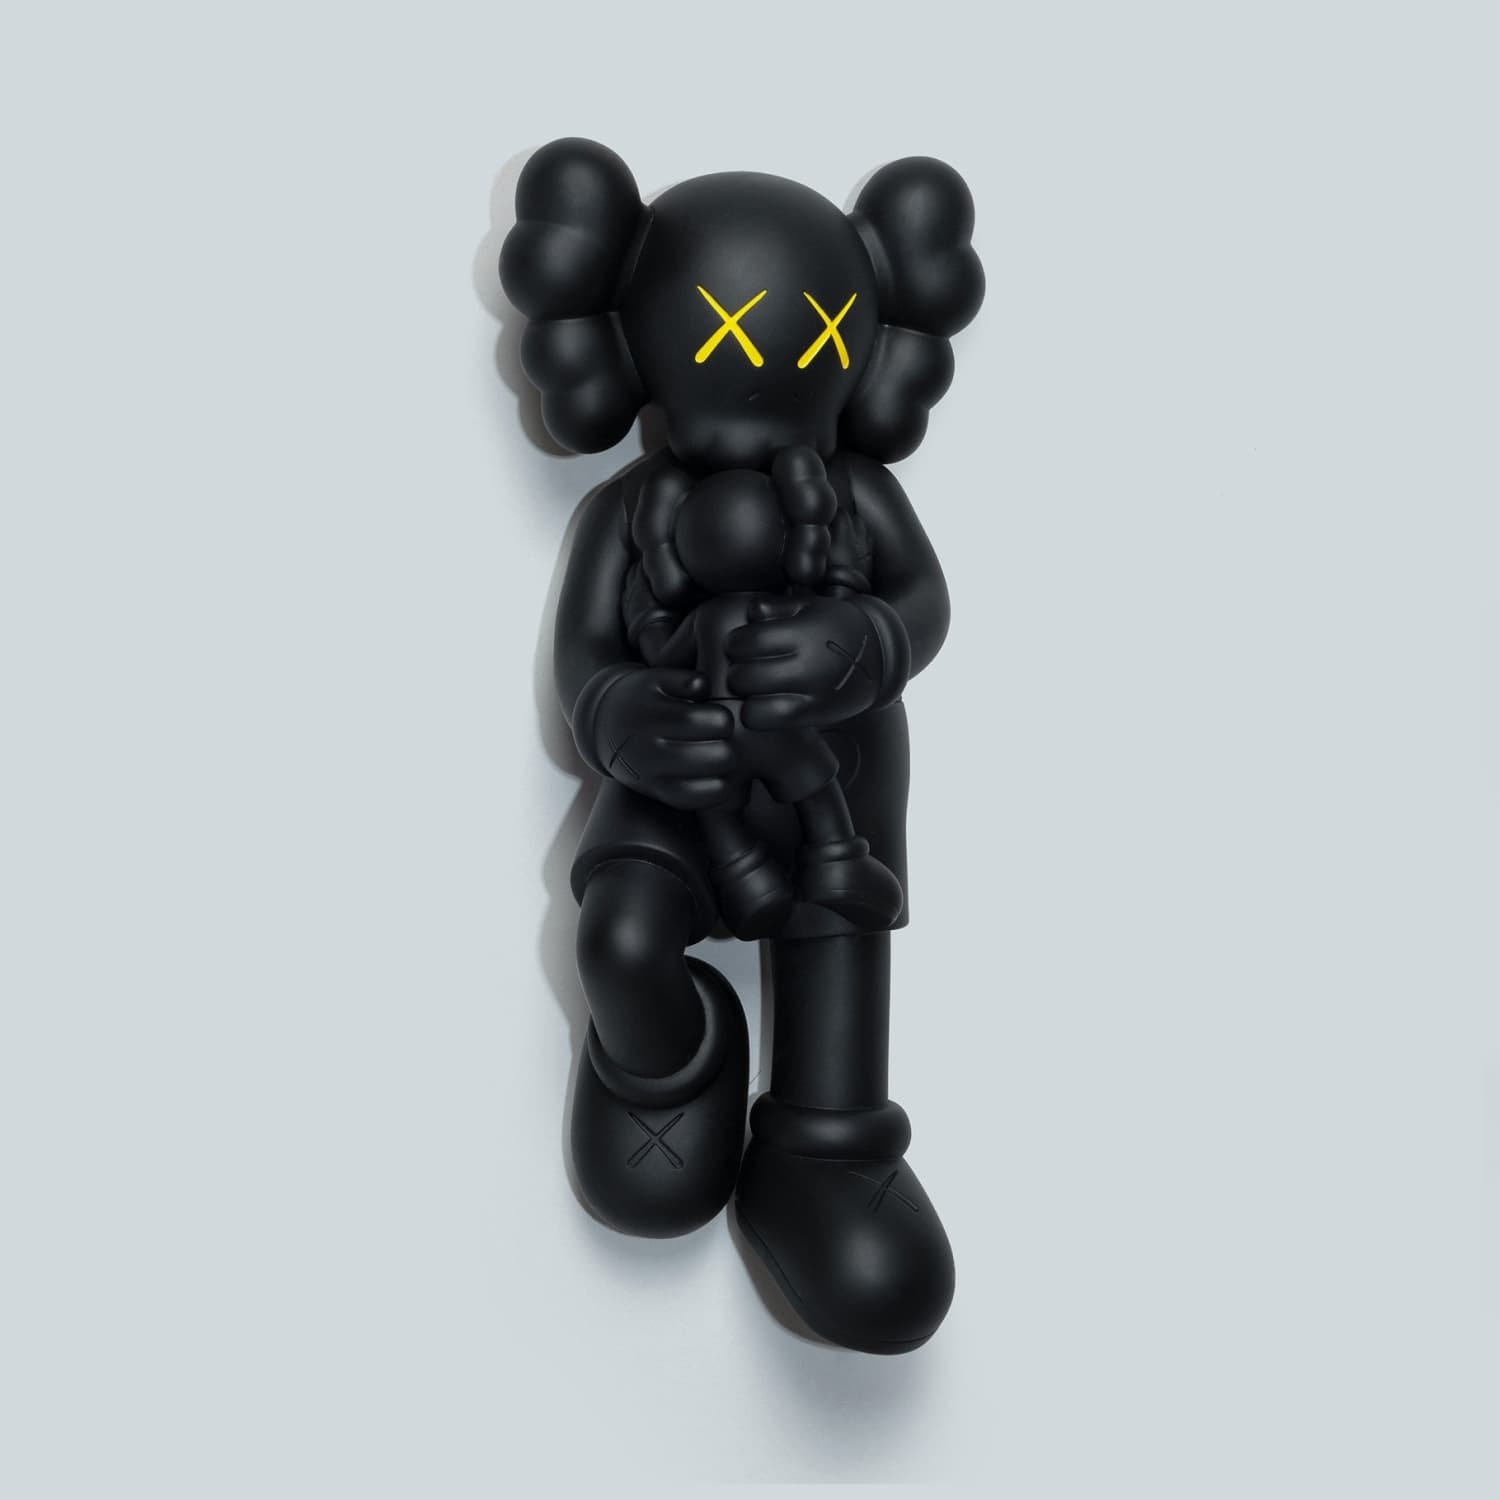 Holiday Singapore Black sculpture by Kaws - Dope! Gallery